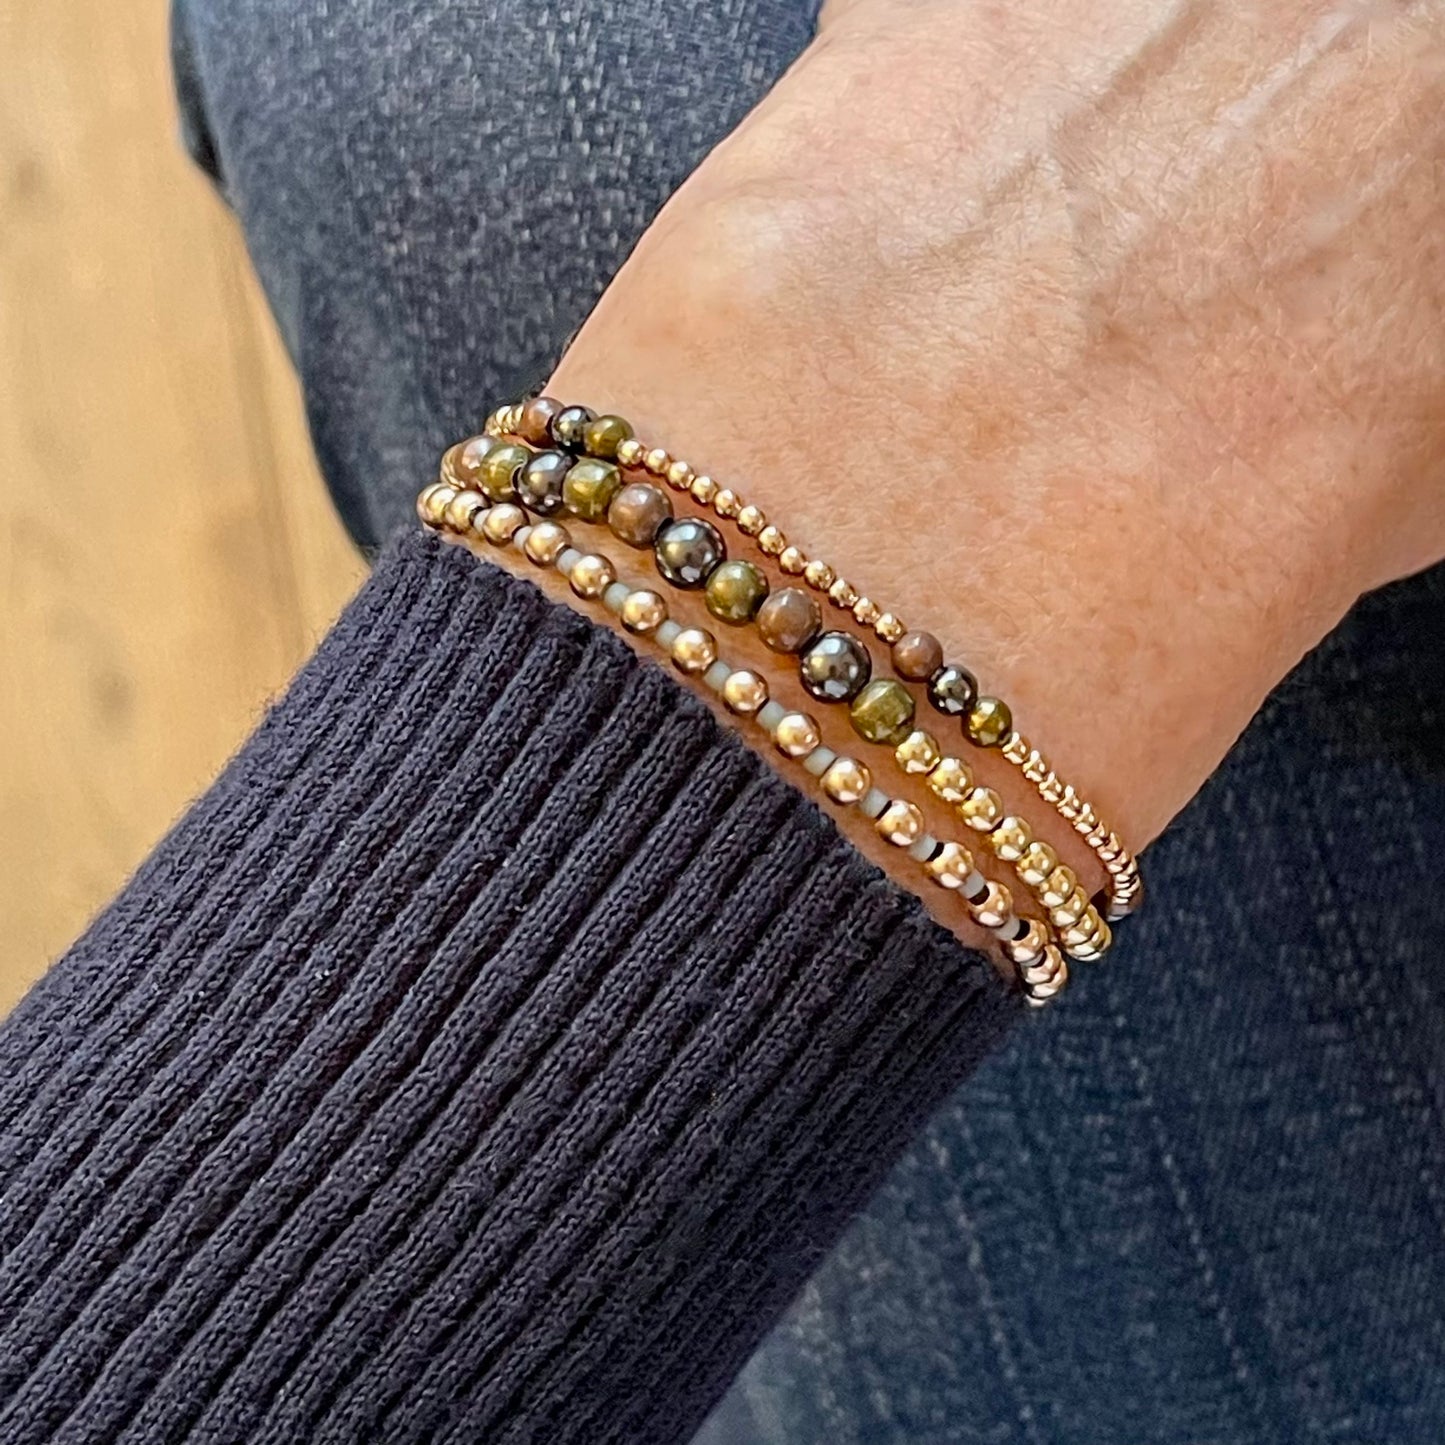 Copper, brass, and gunmetal mixed metal stretch bracelet stack with 14K yellow and rose gold filled beads and seed beads.